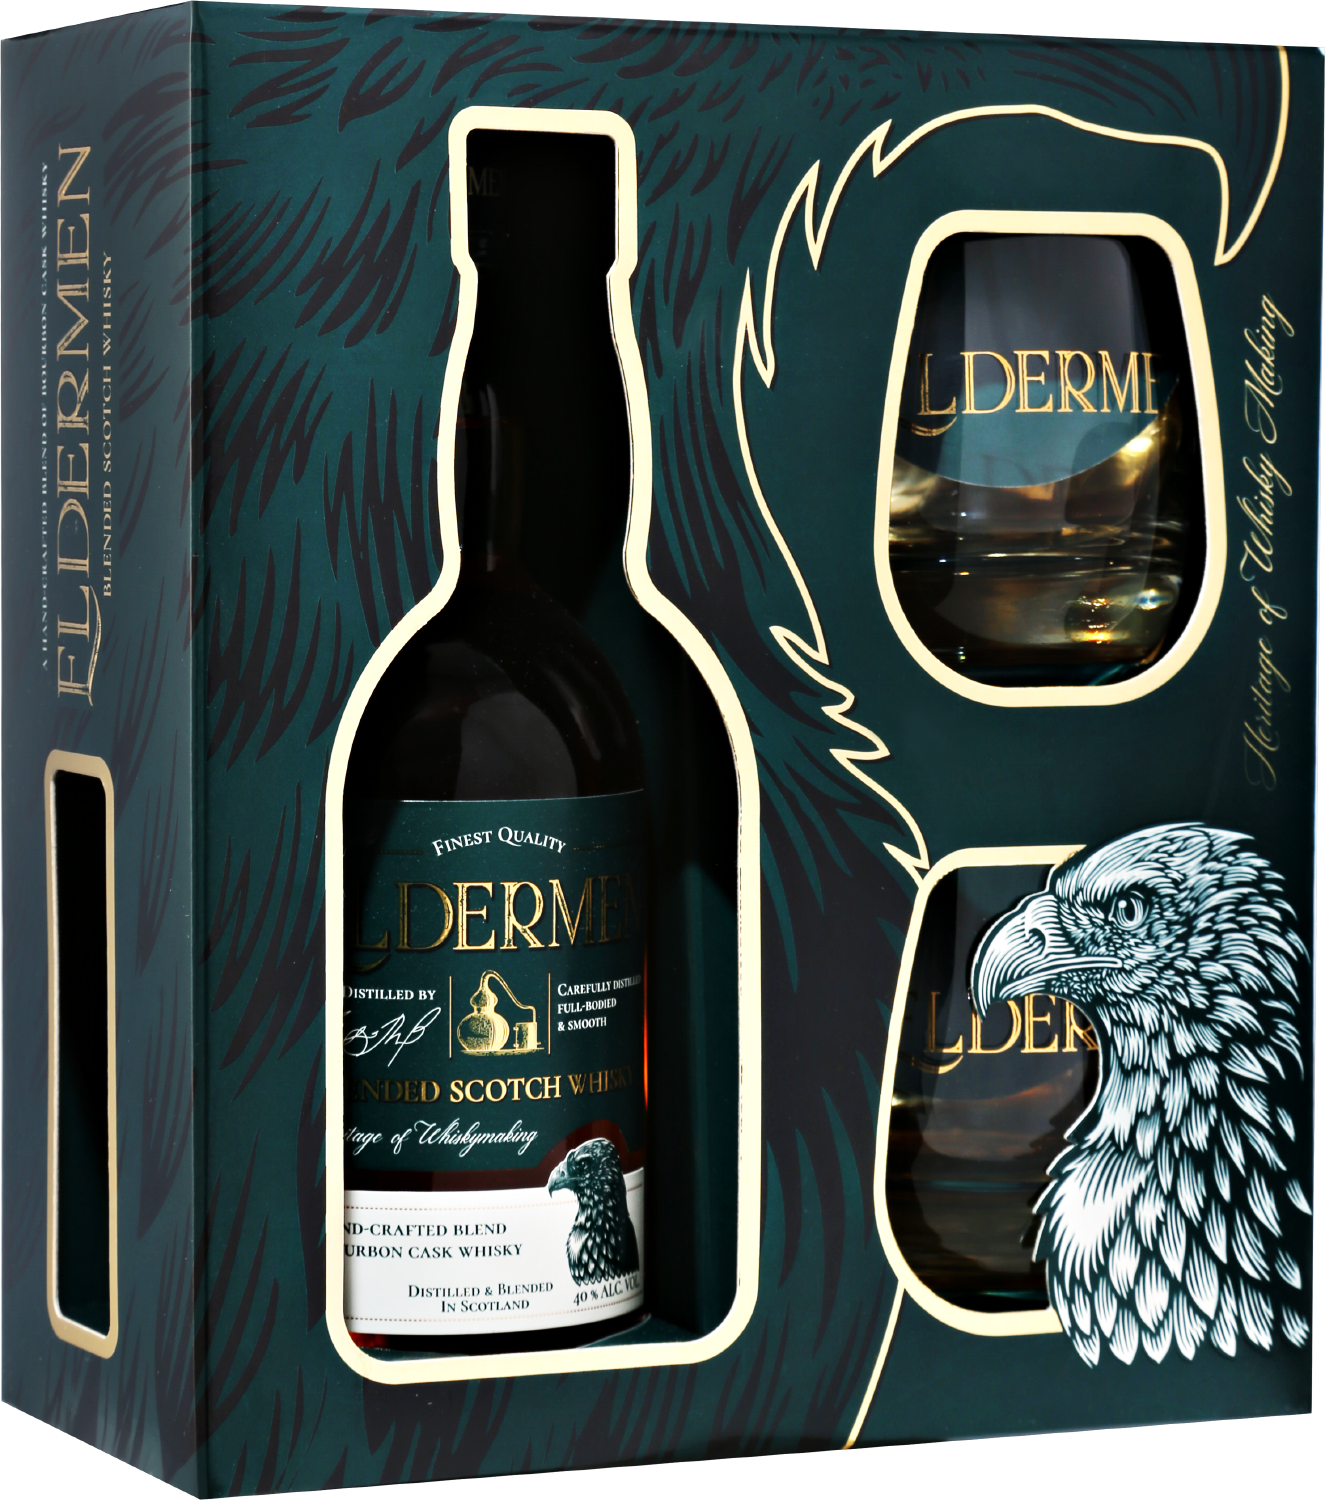 Eldermen Blended Scotch Whisky (gift box with 2 glasses) jamie stuart blended scotch whisky 3 y o gift box with 2 glasses